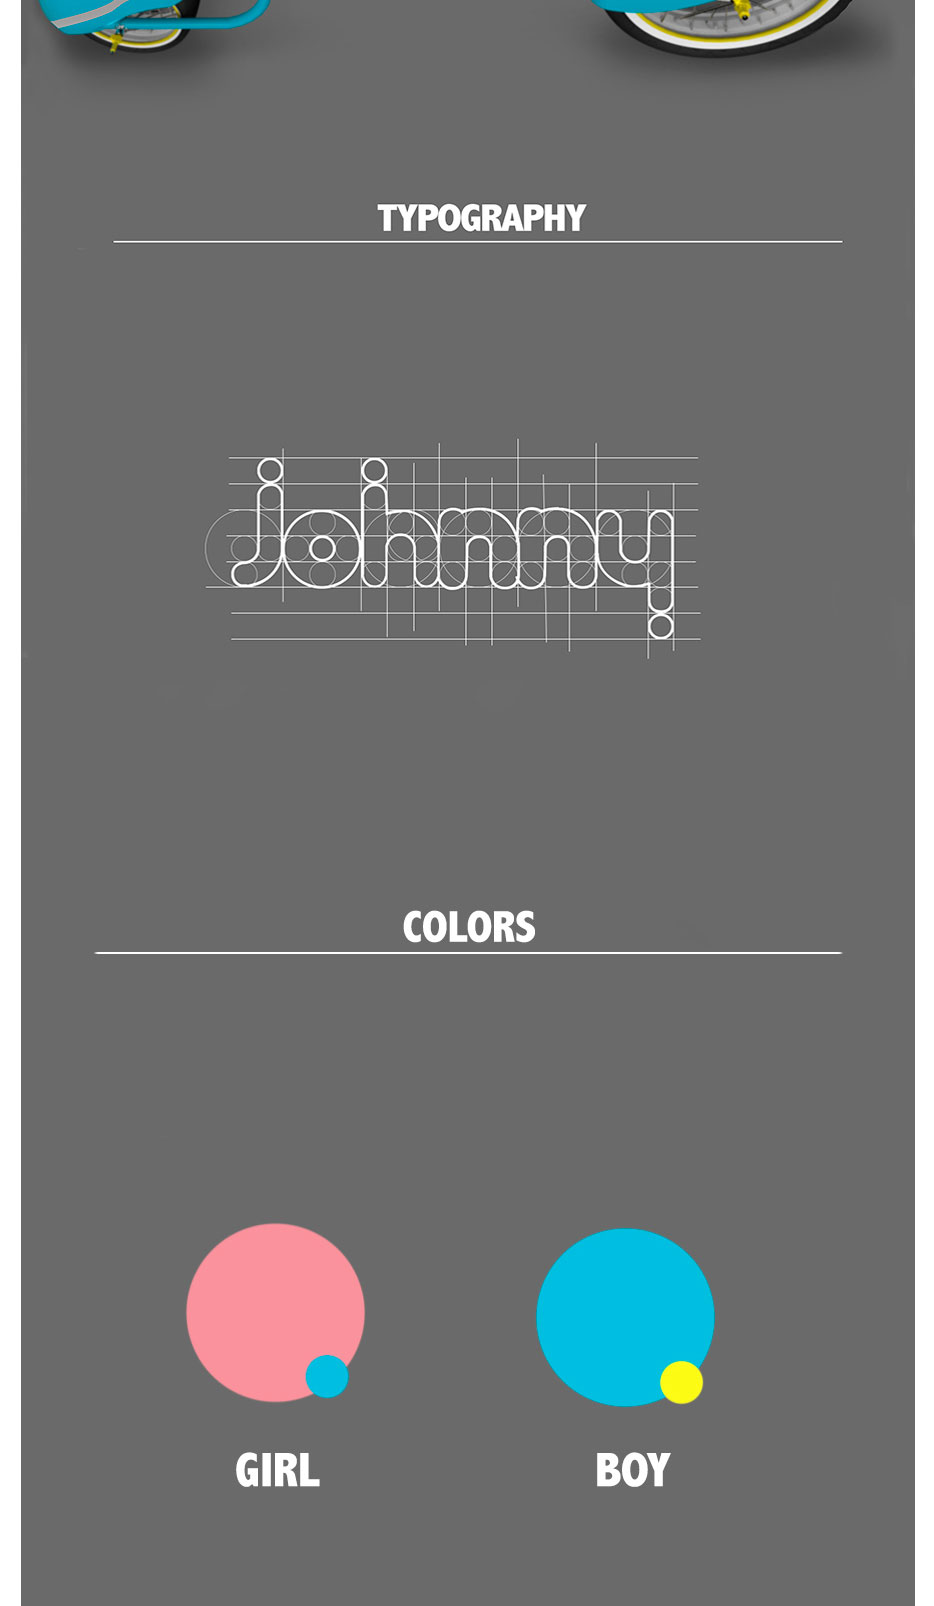 Typography and colors have been selected according the age ann genre of the users